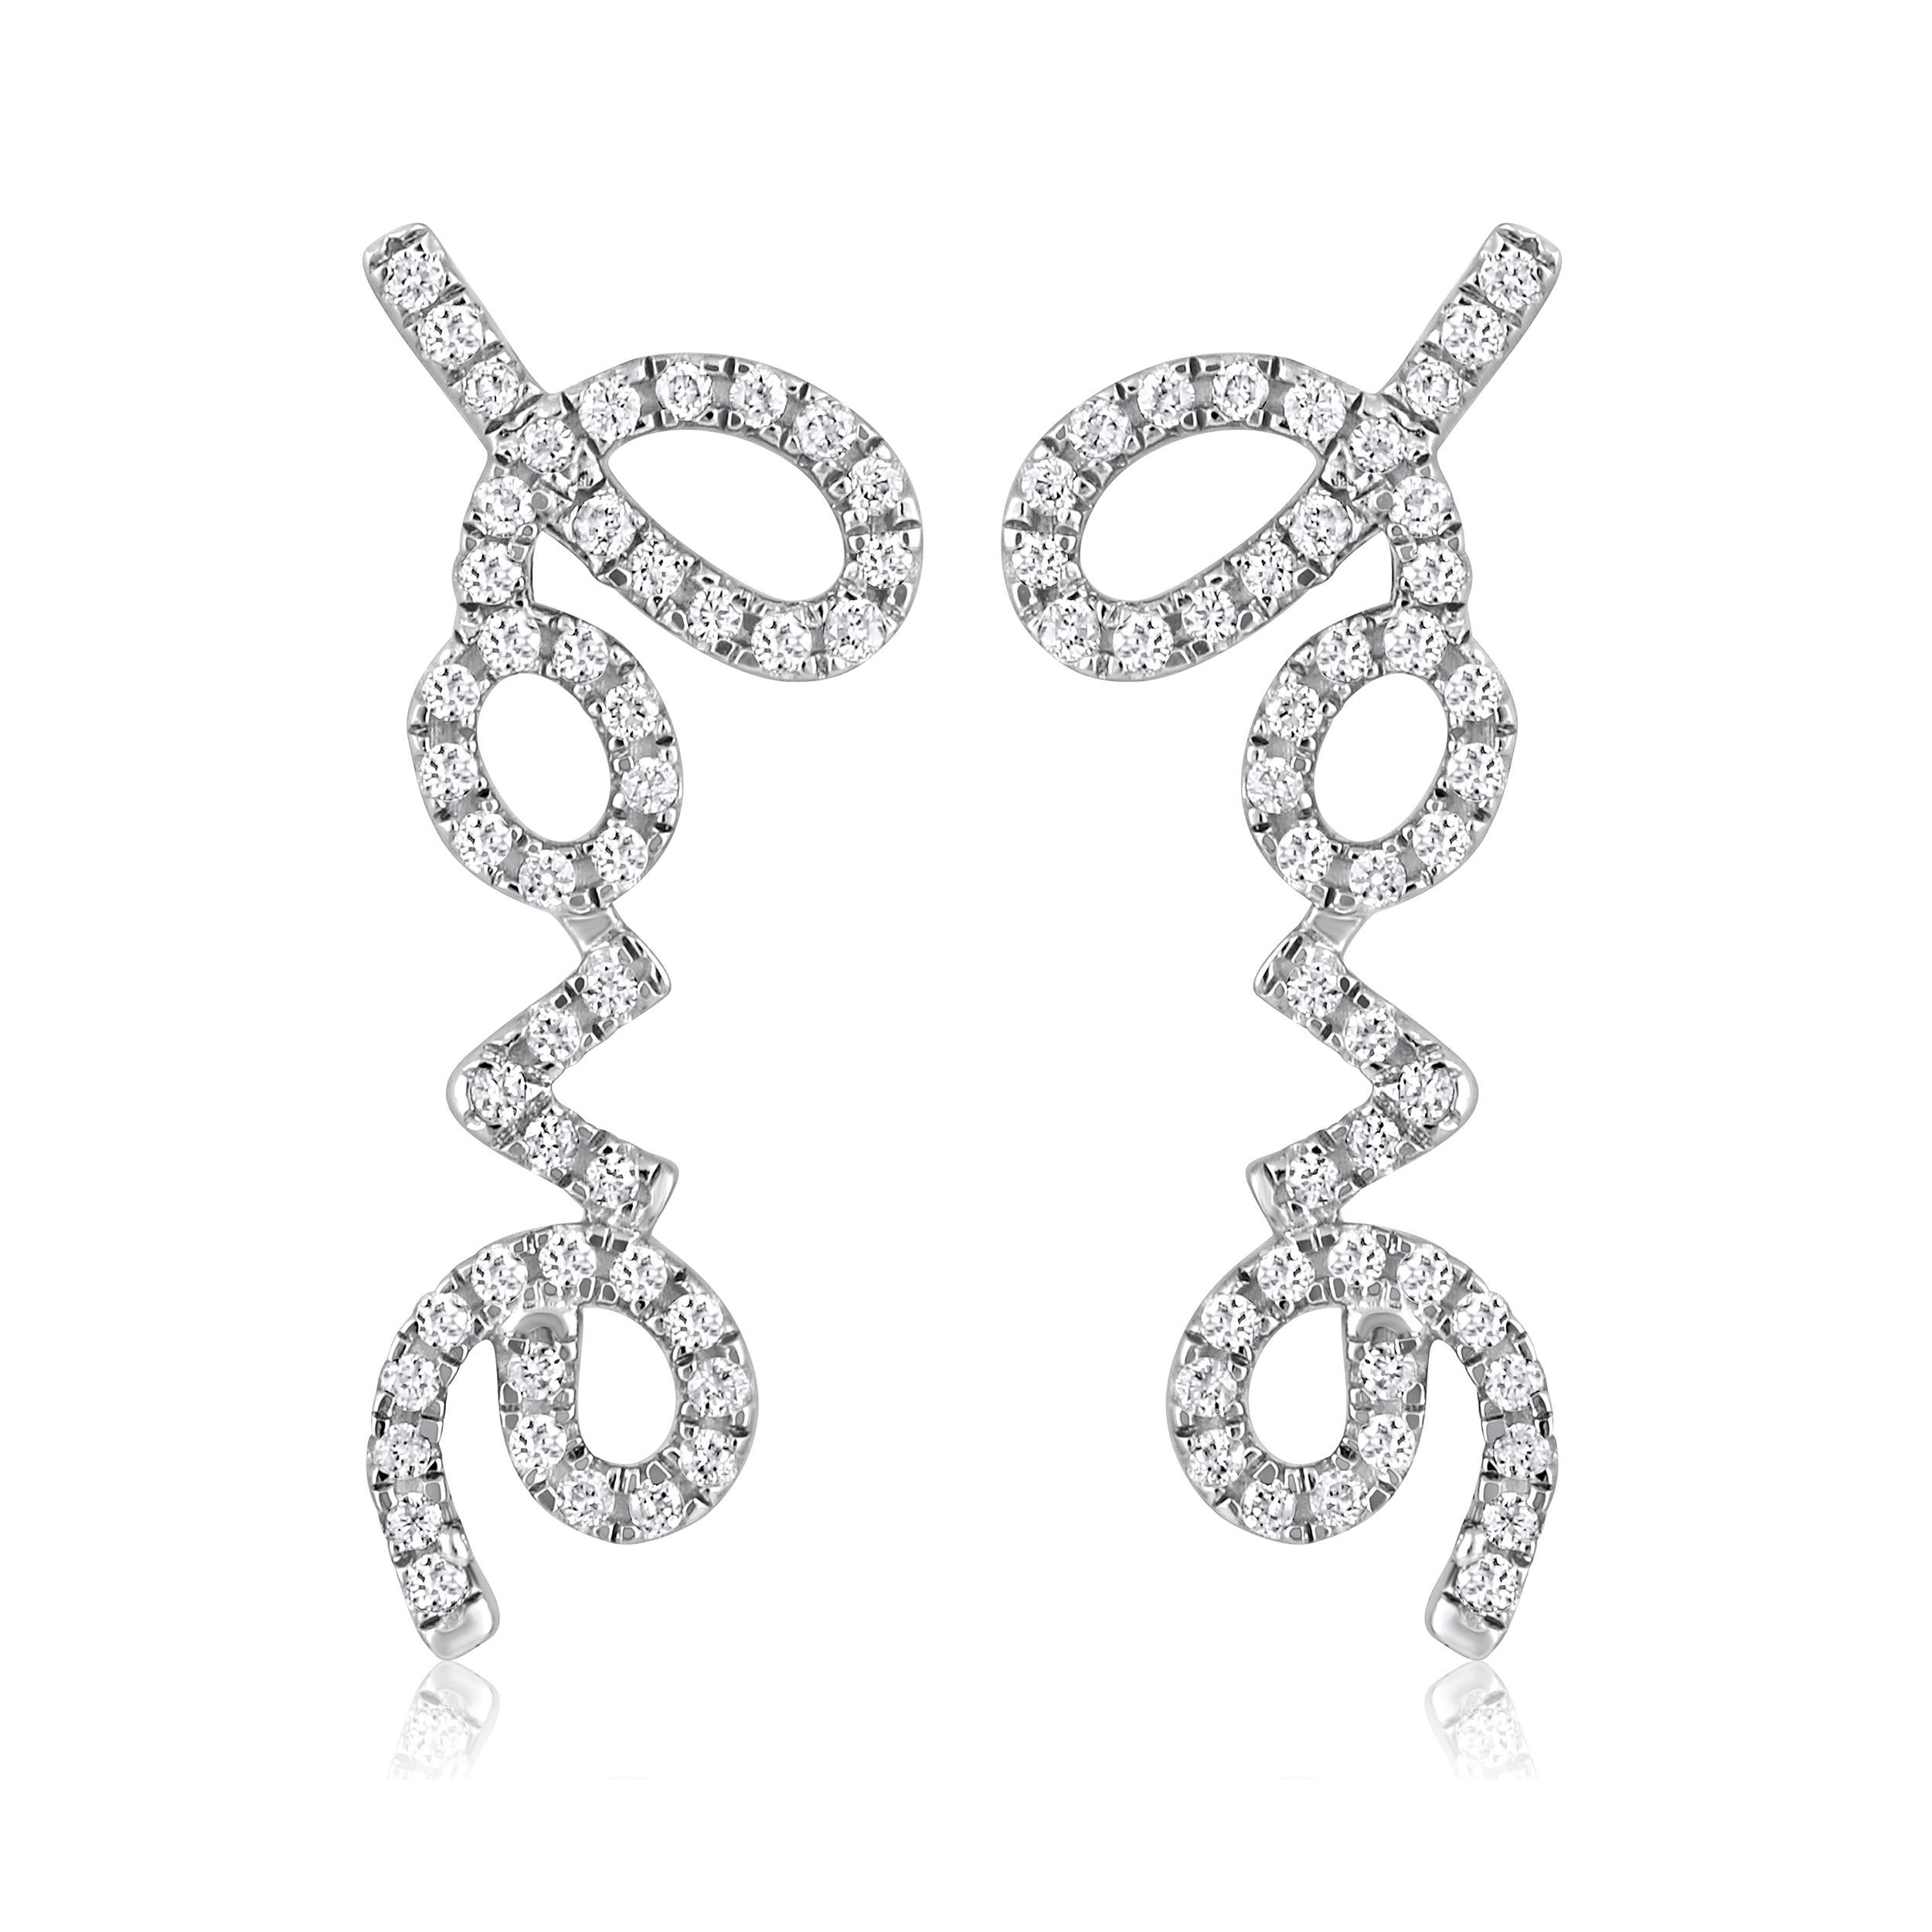 Crafted in 1.76 grams of 14K White Gold, the earrings contains 92 stones of Round Diamonds with a total of 0.17 carat in G-H color and SI clarity.

CONTEMPORARY AND TIMELESS ESSENCE: Crafted in 14-karat/18-karat with 100% natural diamond and